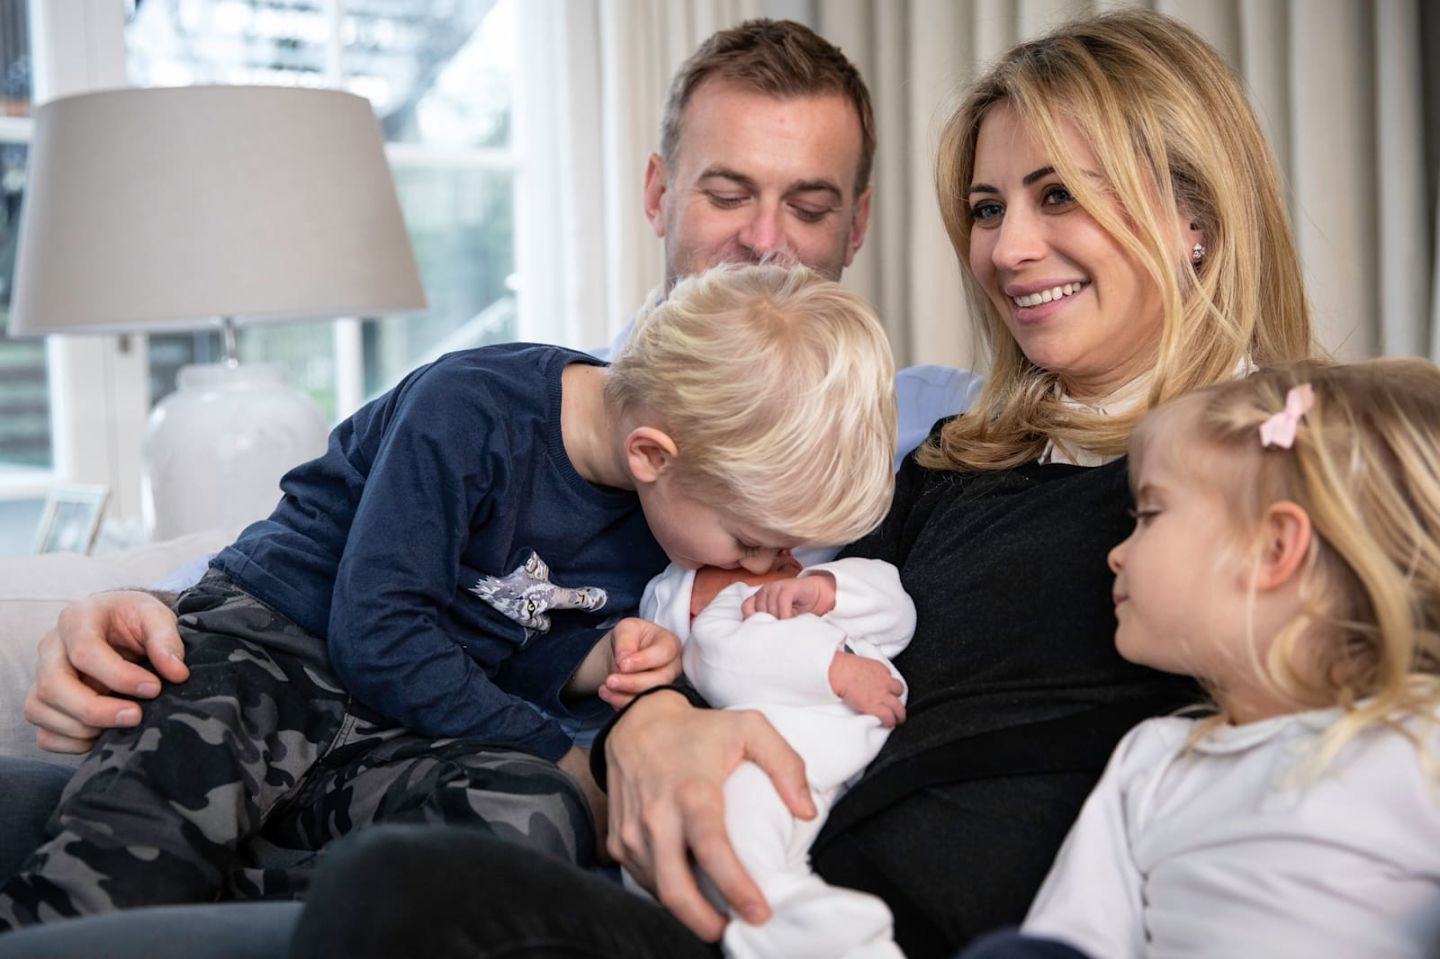 Holly Branson and her husband Freddie Andrewes smile with their three children